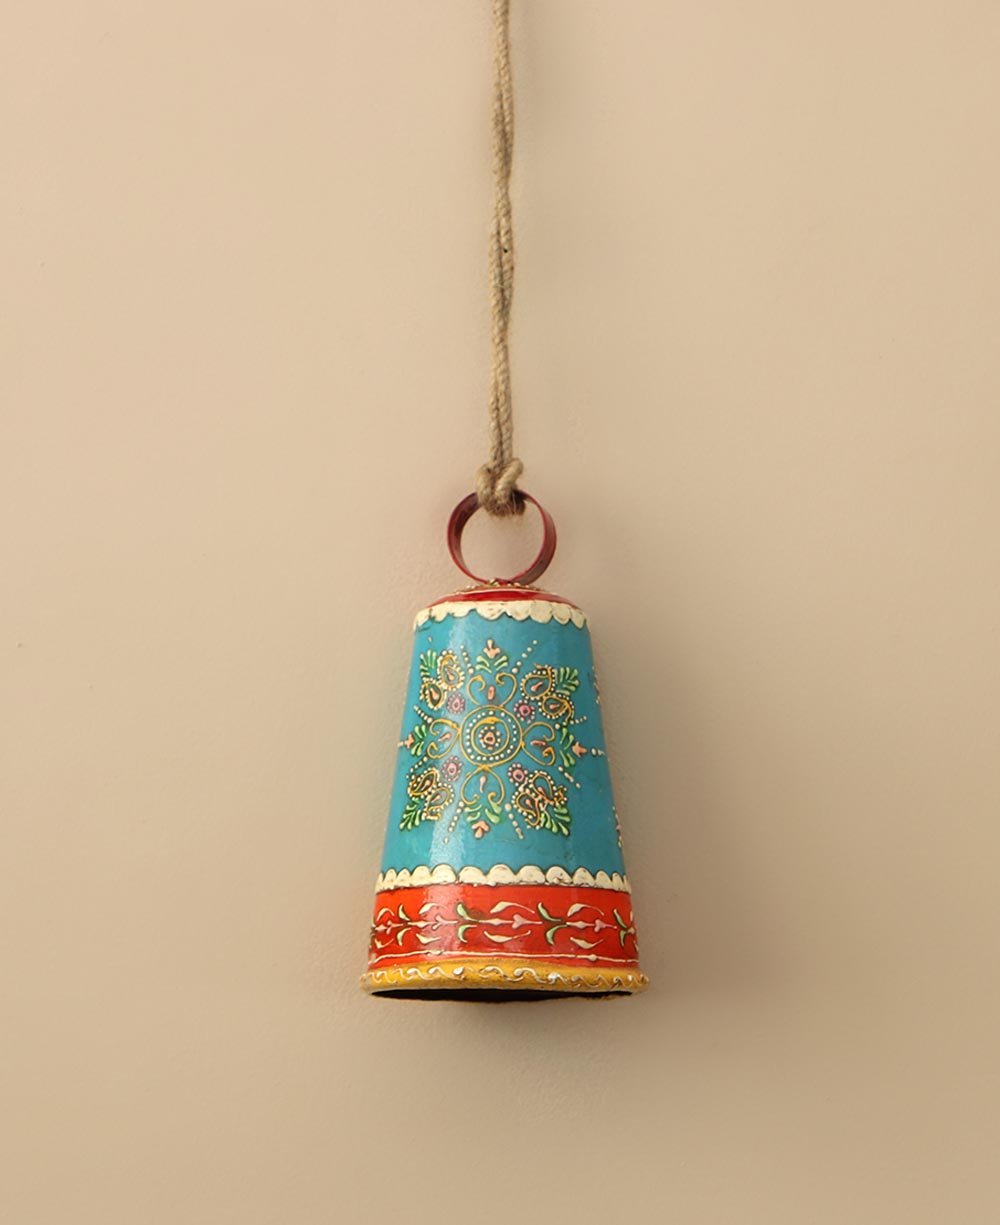 Fairtrade Handpainted Artistic Floral Design Upcycled Bell - Wall Hanging